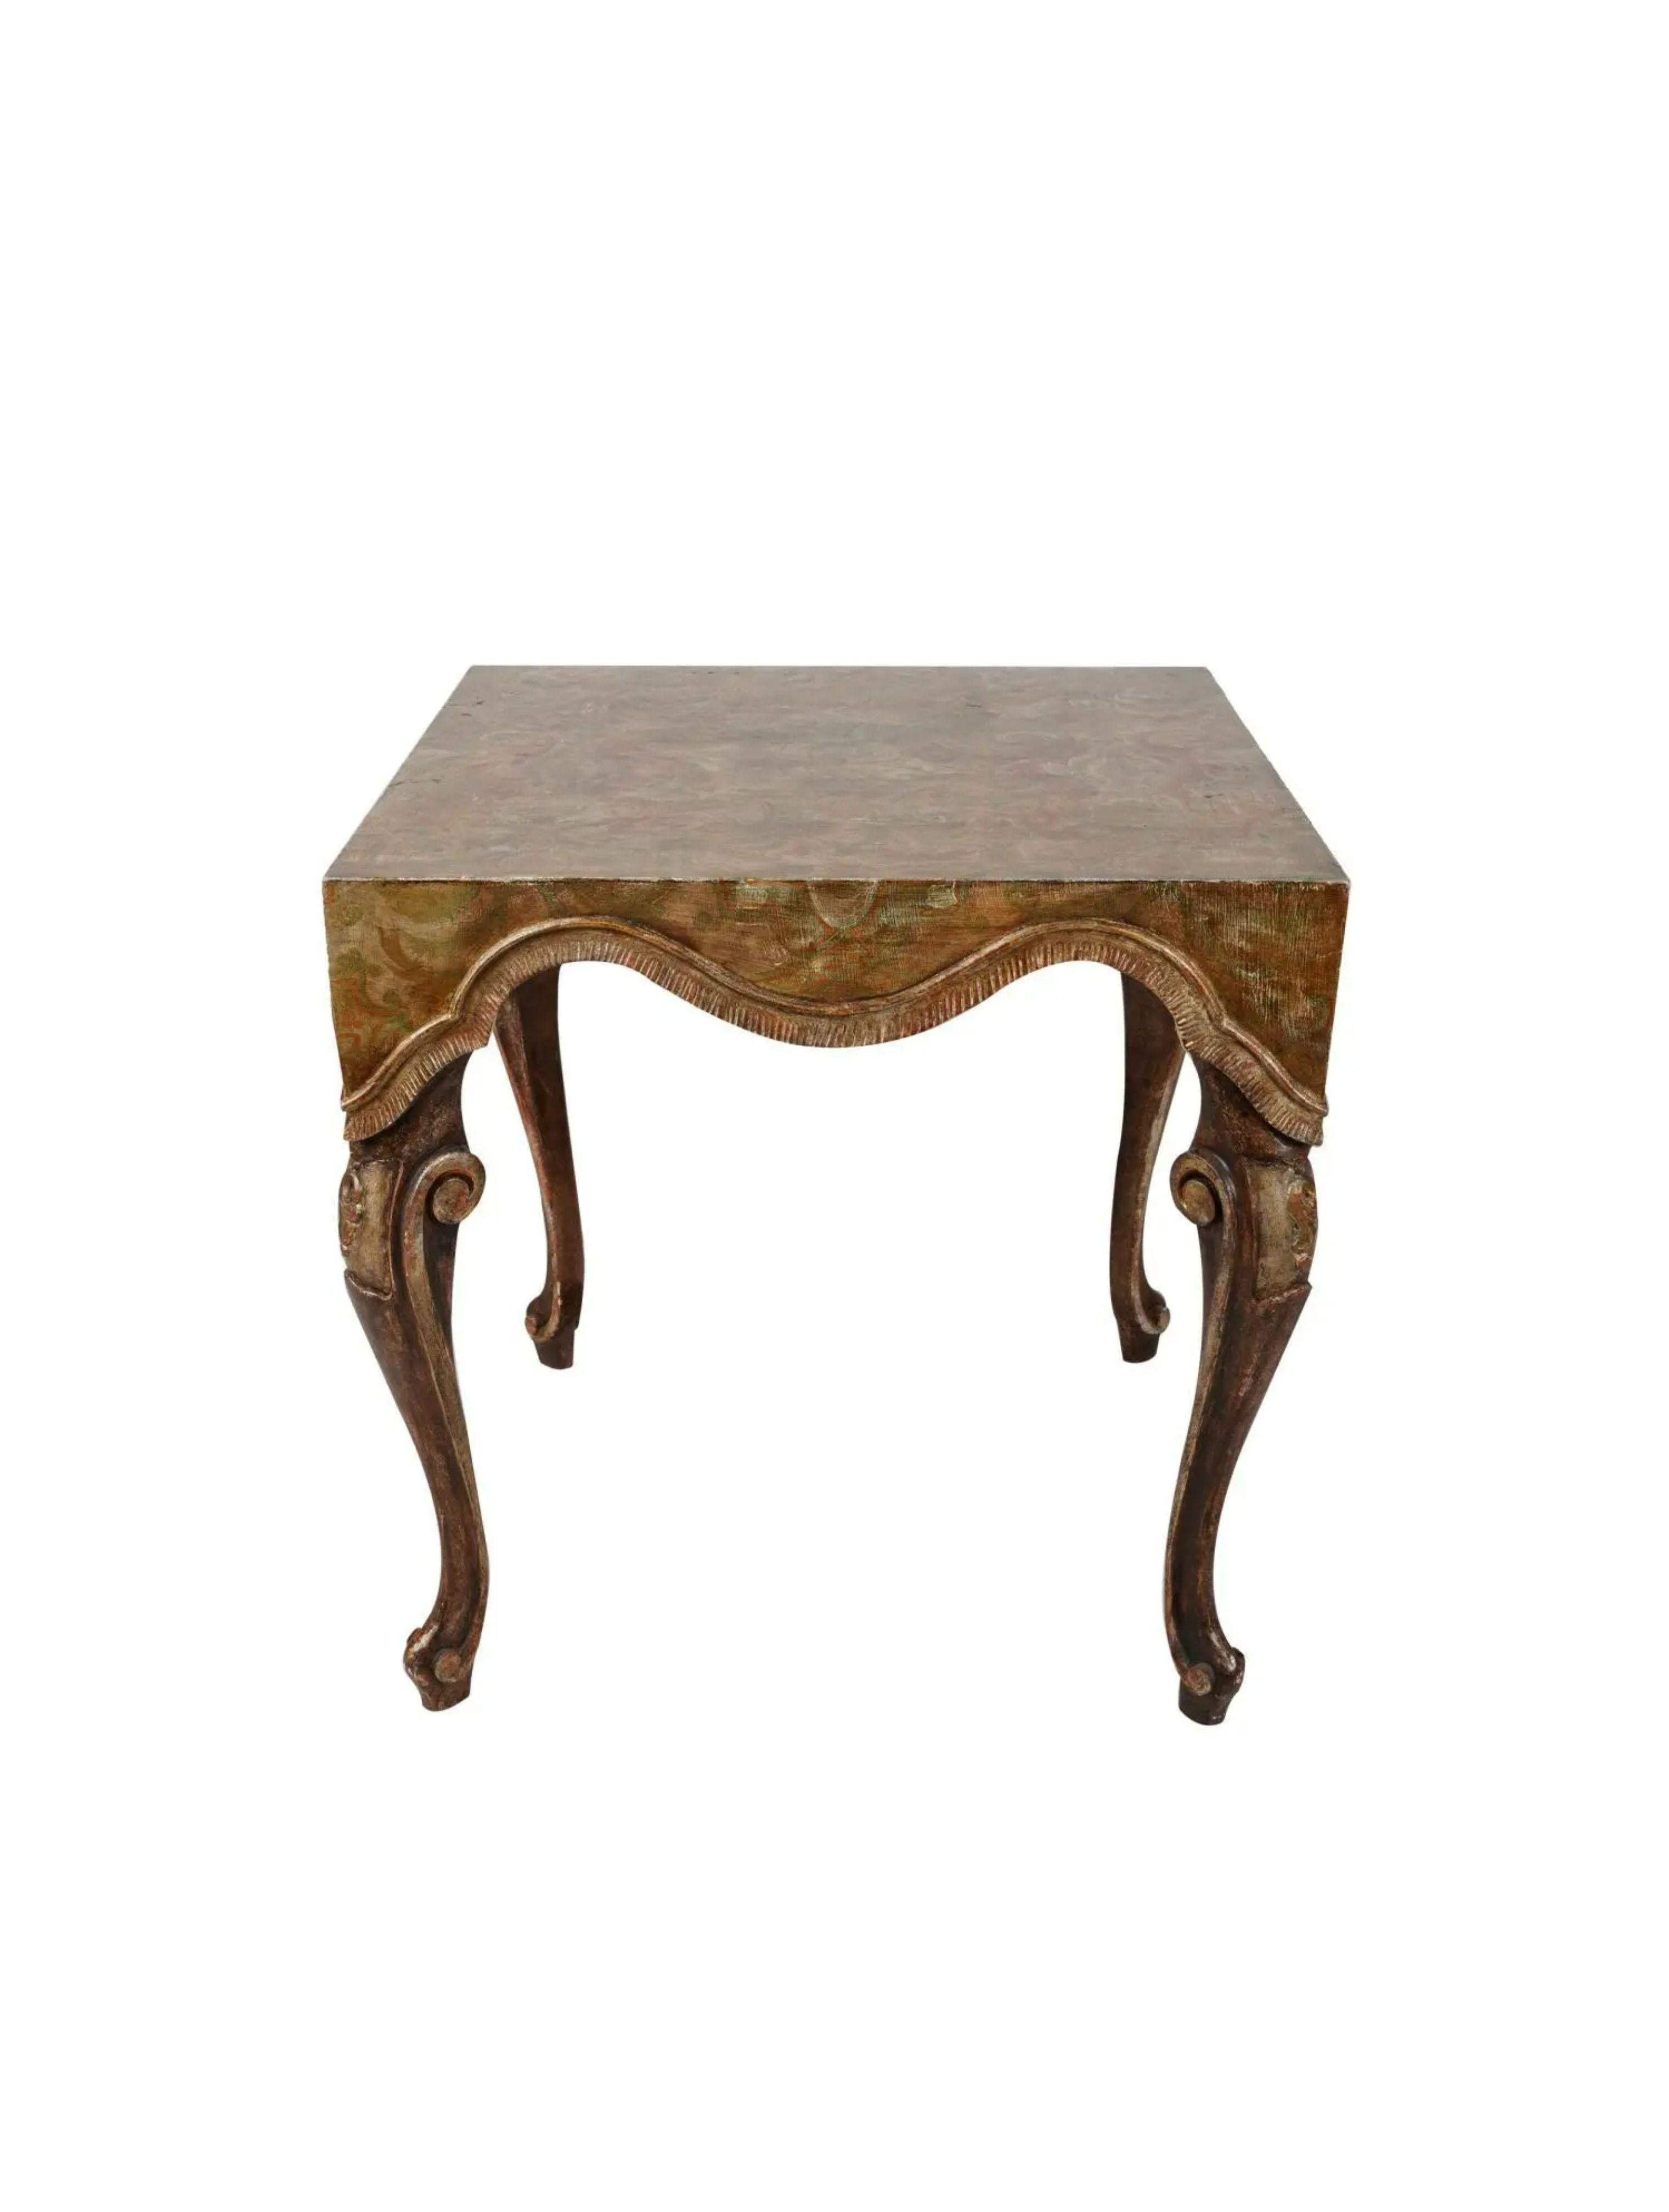 Venetian Style Fortuny Polychrome painted giltwood side table

Additional information: 
Materials: Giltwood, Paint, Polychrome
Color: Silver
Period: Mid 20th Century
Styles: Italian
Table Shape: Square
Item Type: Vintage, Antique or